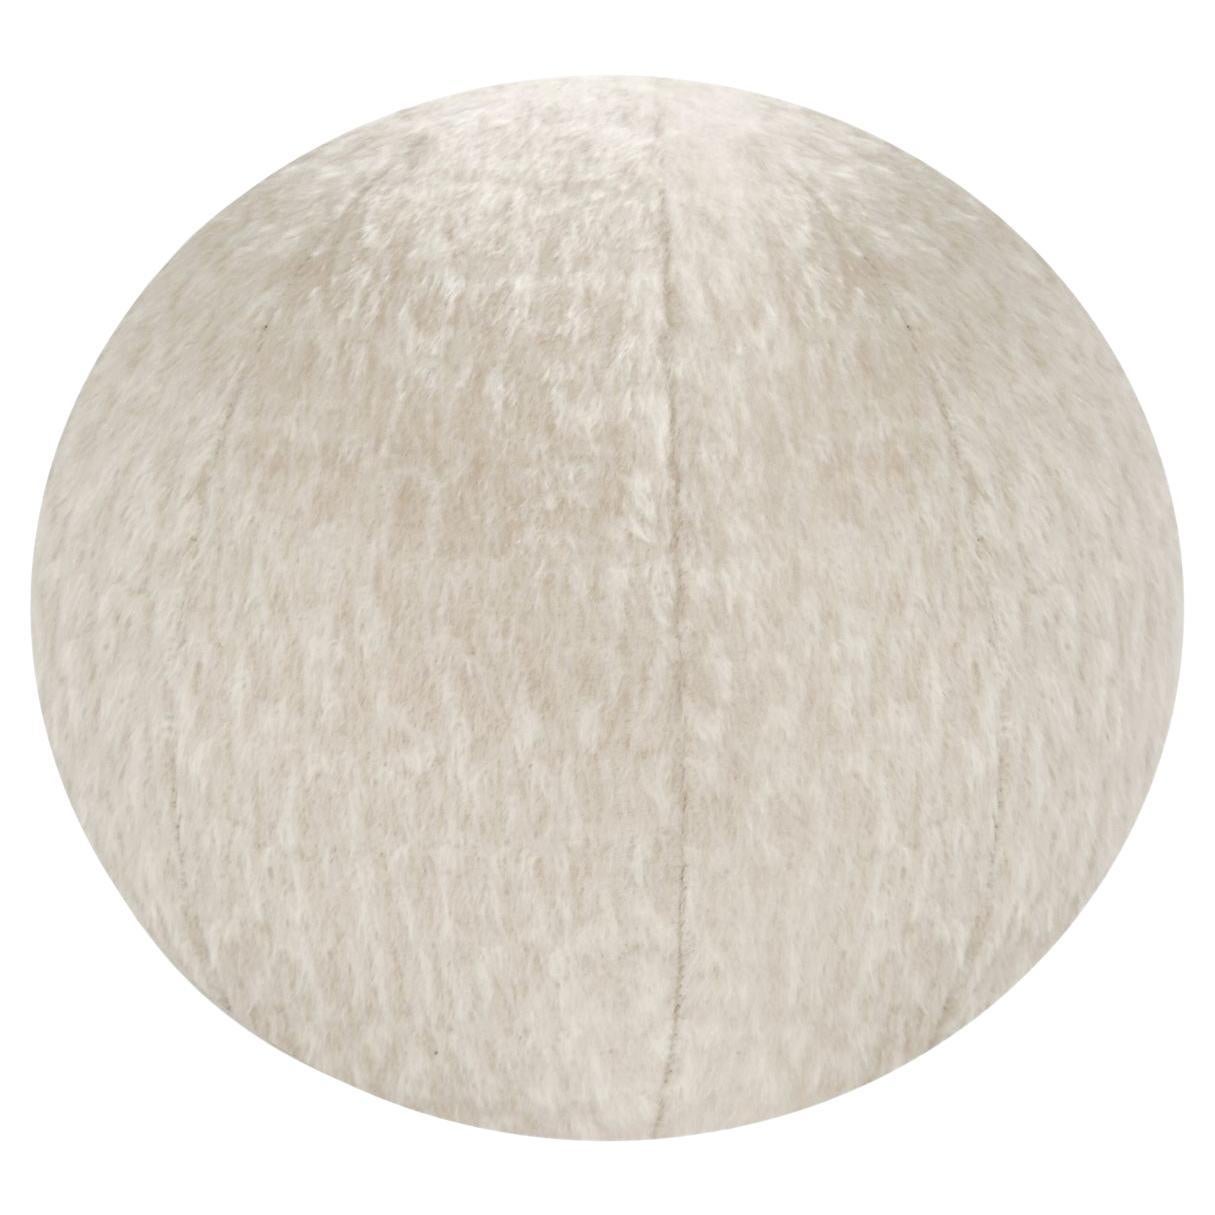 Orb Accent Pillow in Ivory Cream Alpaca by Holly Hunt